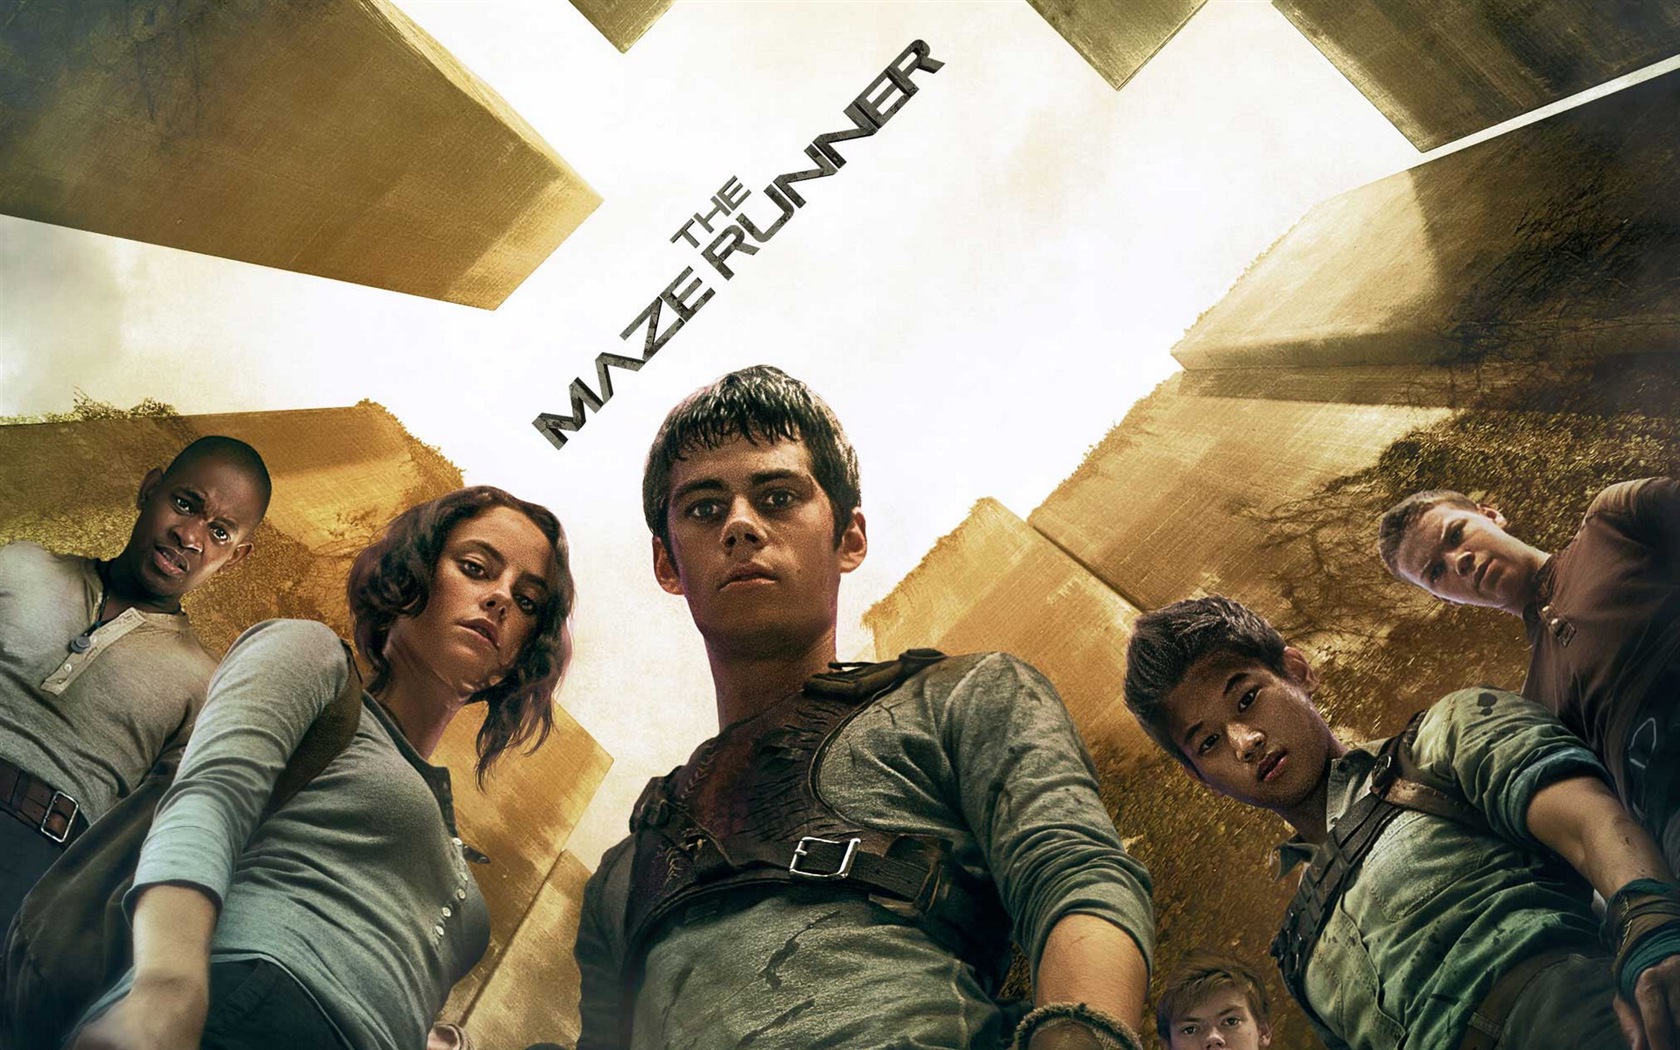 The Maze Runner HD movie wallpapers #4 - 1680x1050